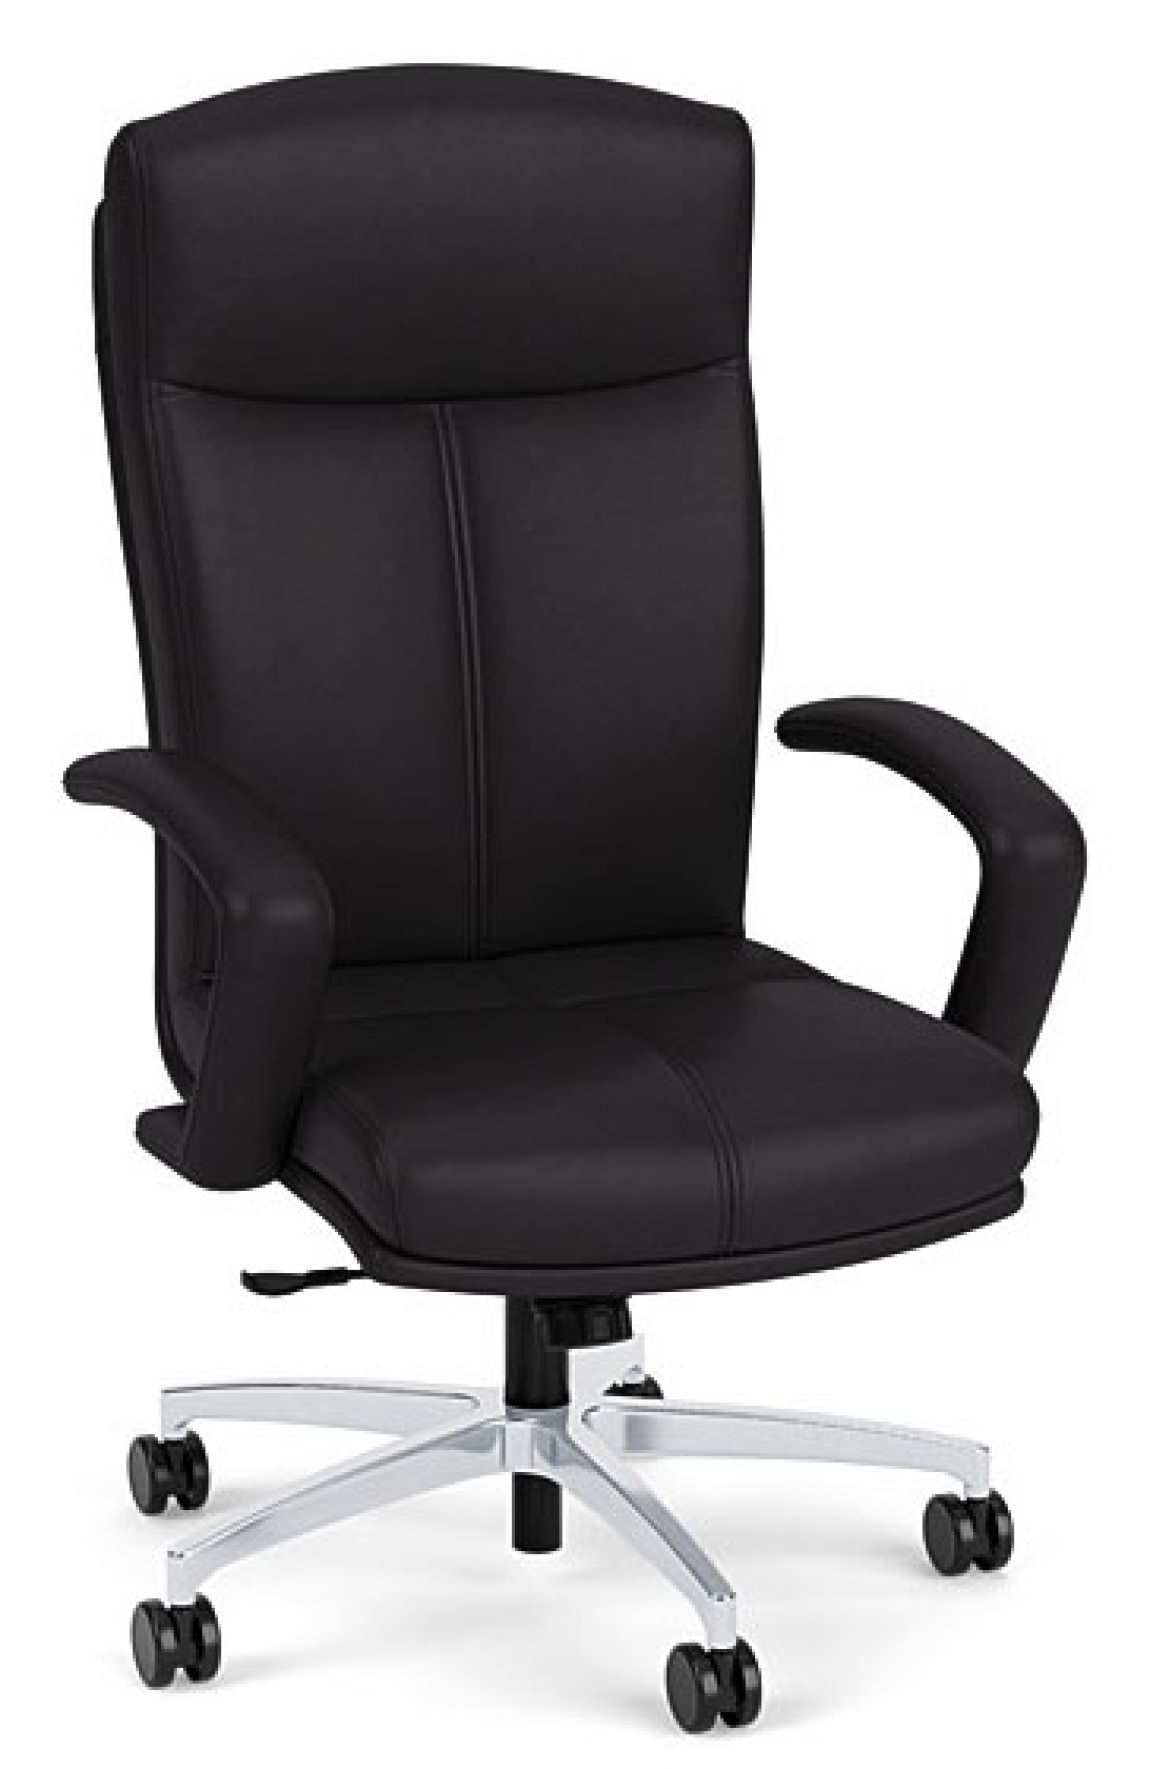 Vinyl High Back Conference Room Chair